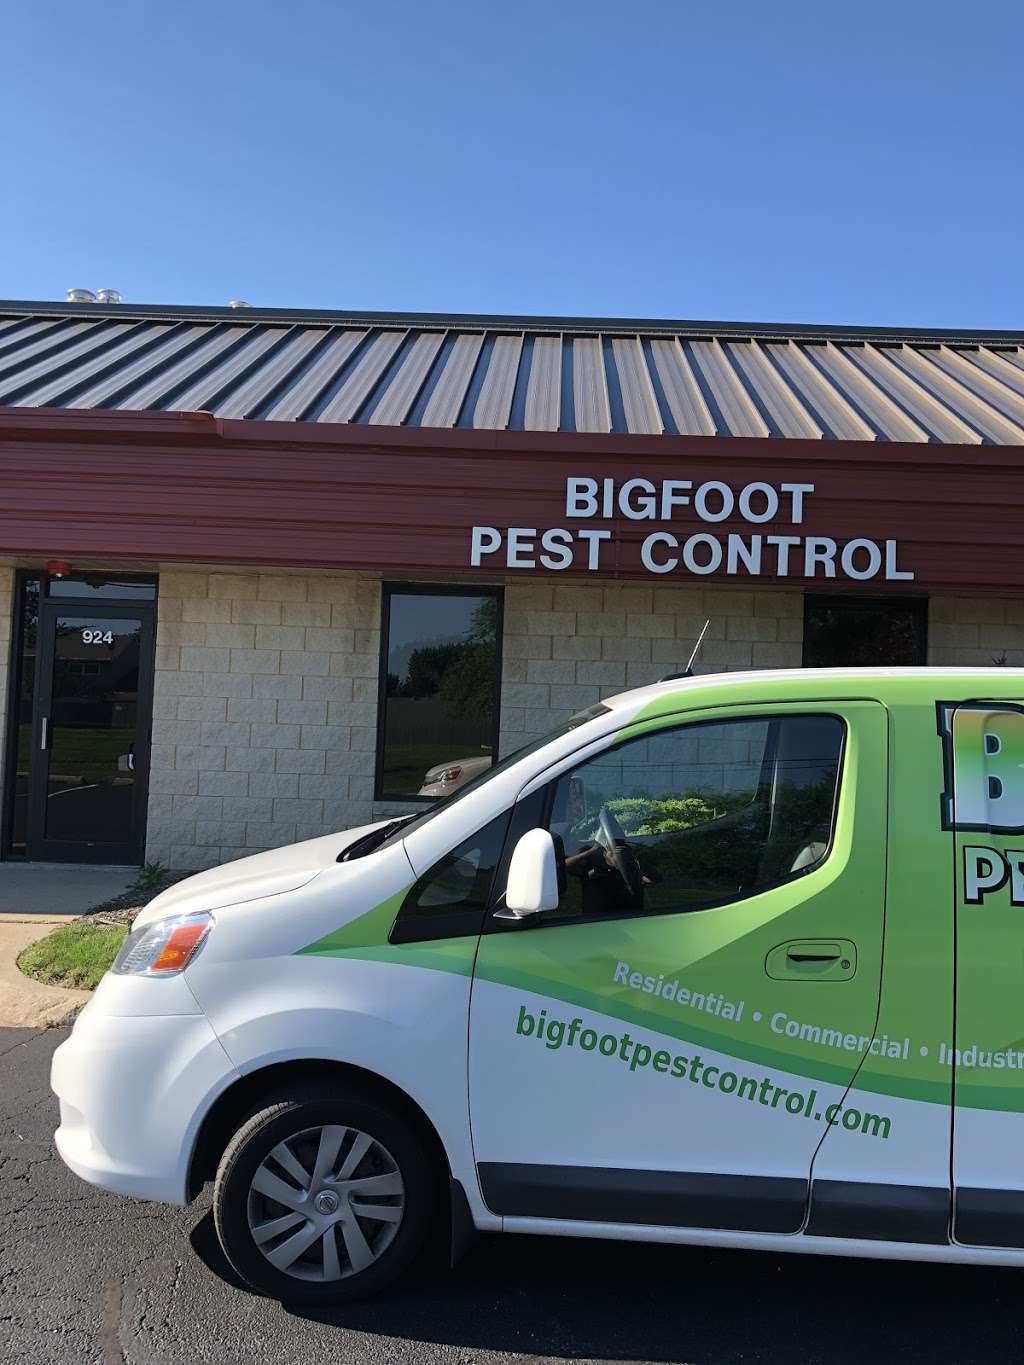 Bigfoot Pest Control | 924 Central Ave, Roselle, IL 60172, USA | Phone: (847) 891-8852